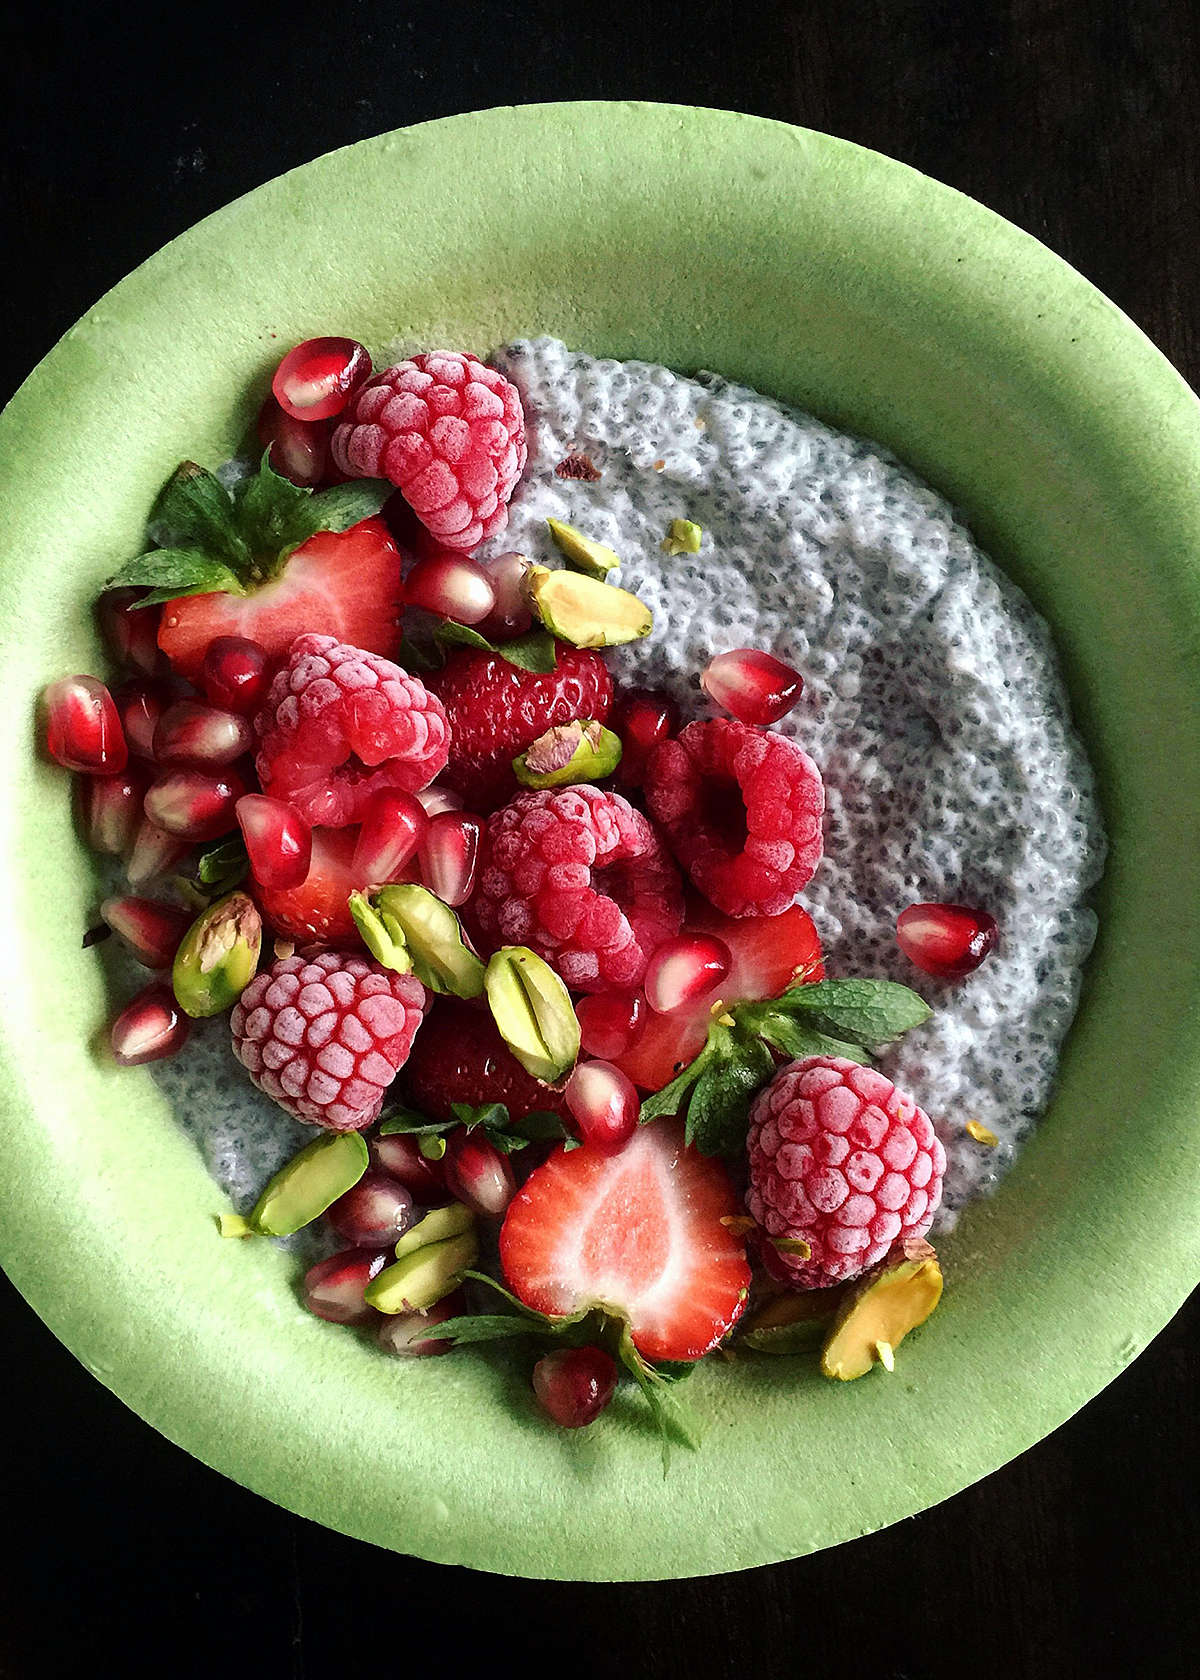 chia seed pudding with strawberries, raspberries, pomegranate